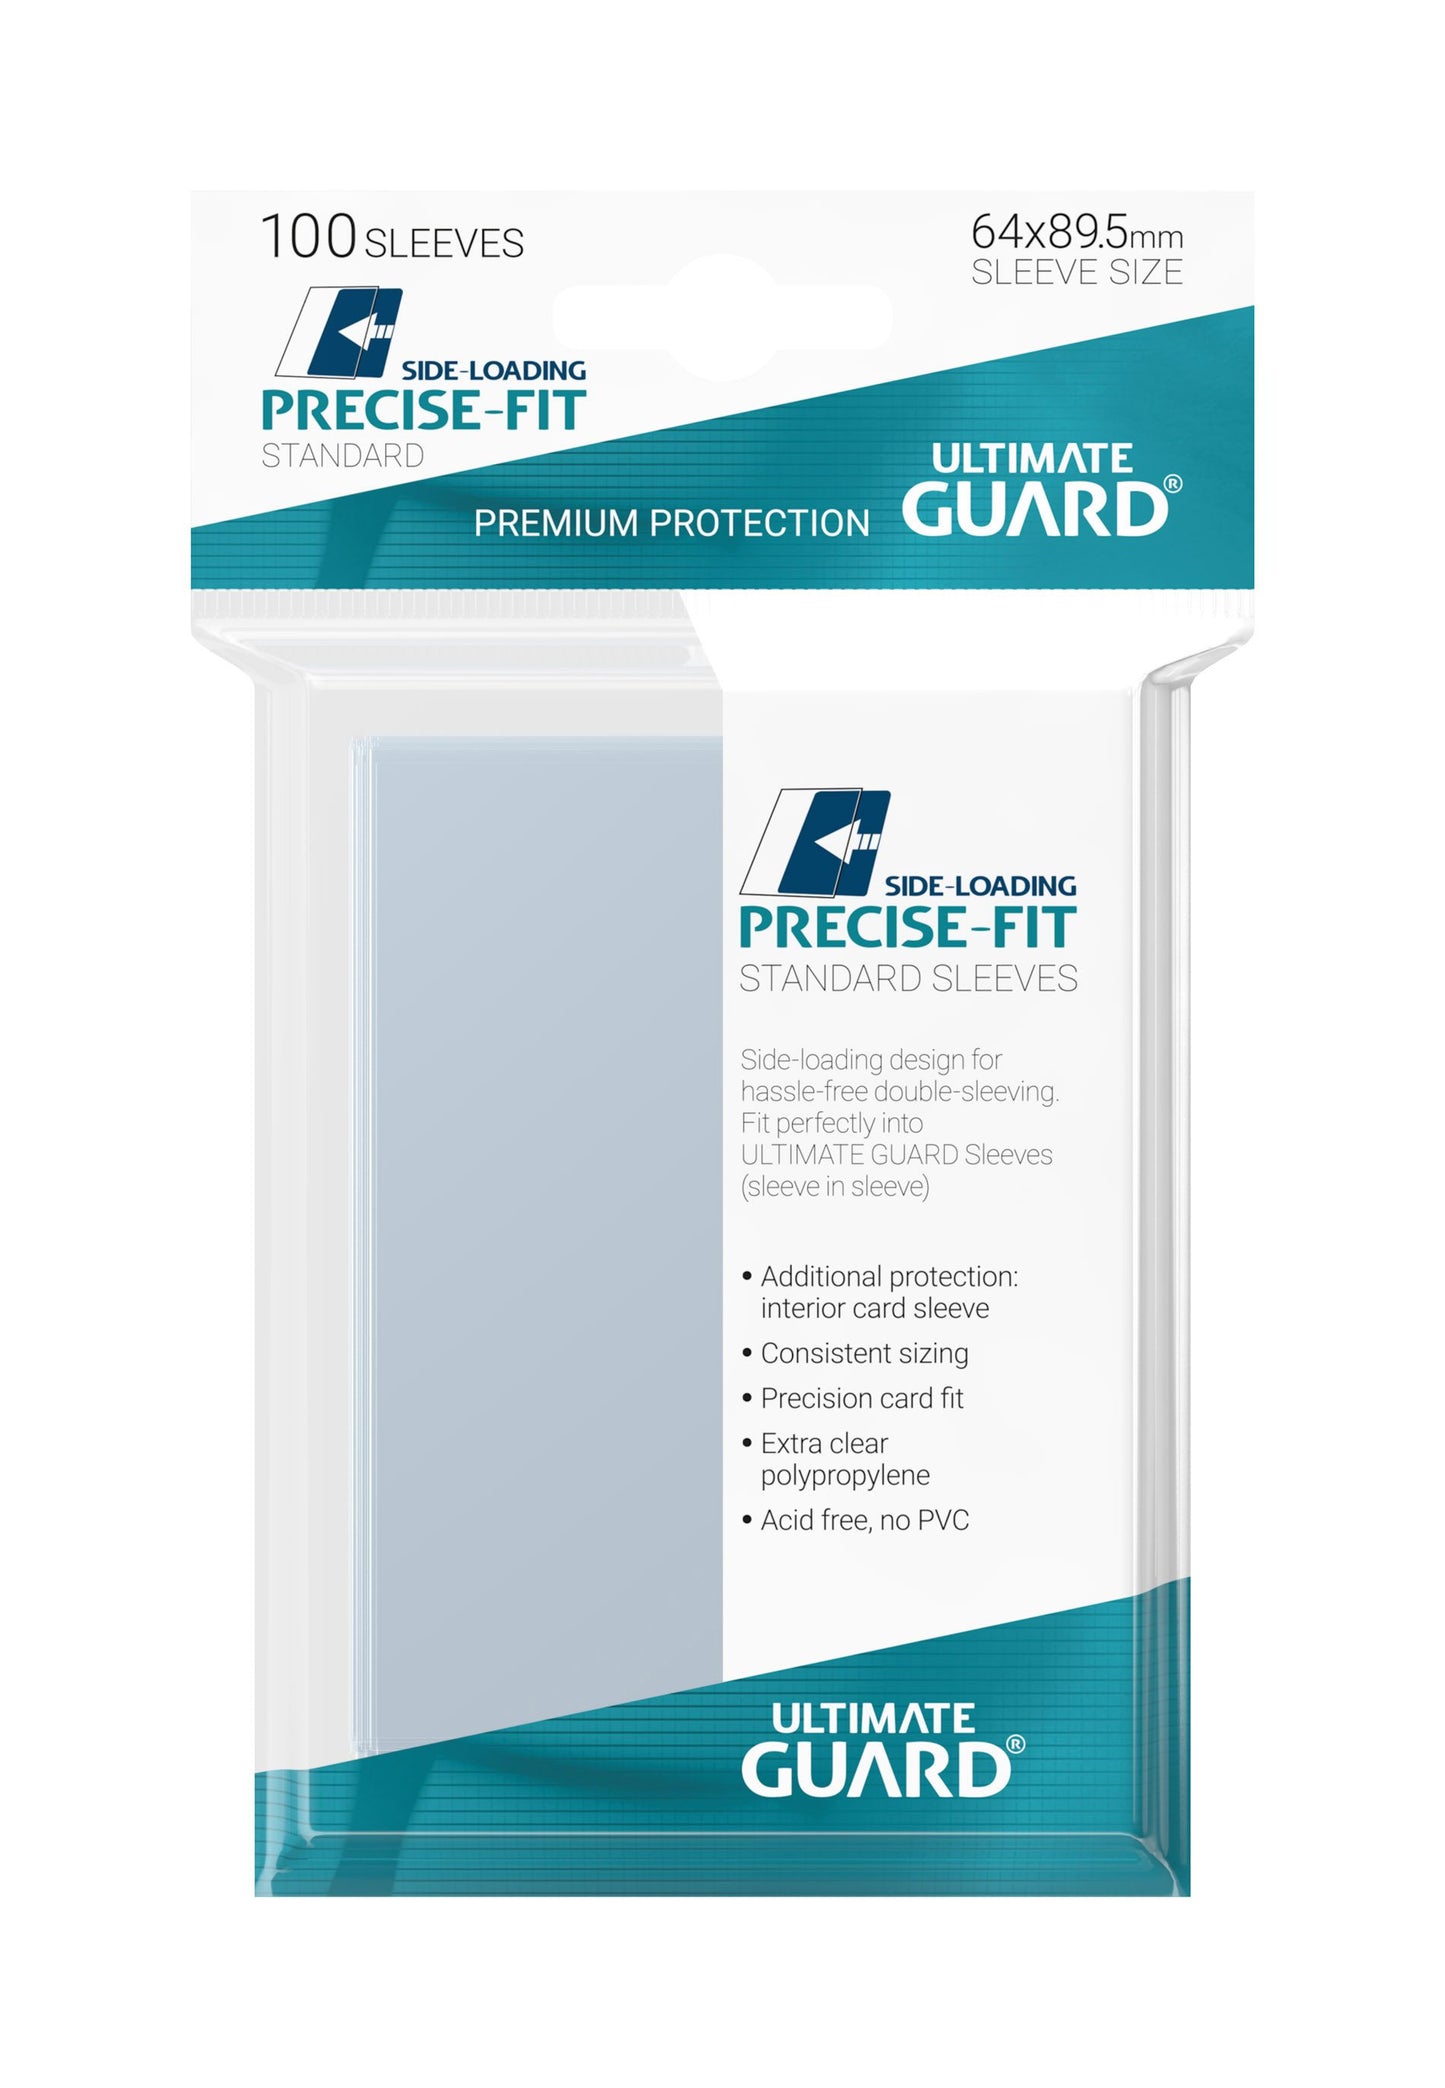 Ultimate Guard - Standard Size Sleeves - Precise-Fit Sideloading (100)